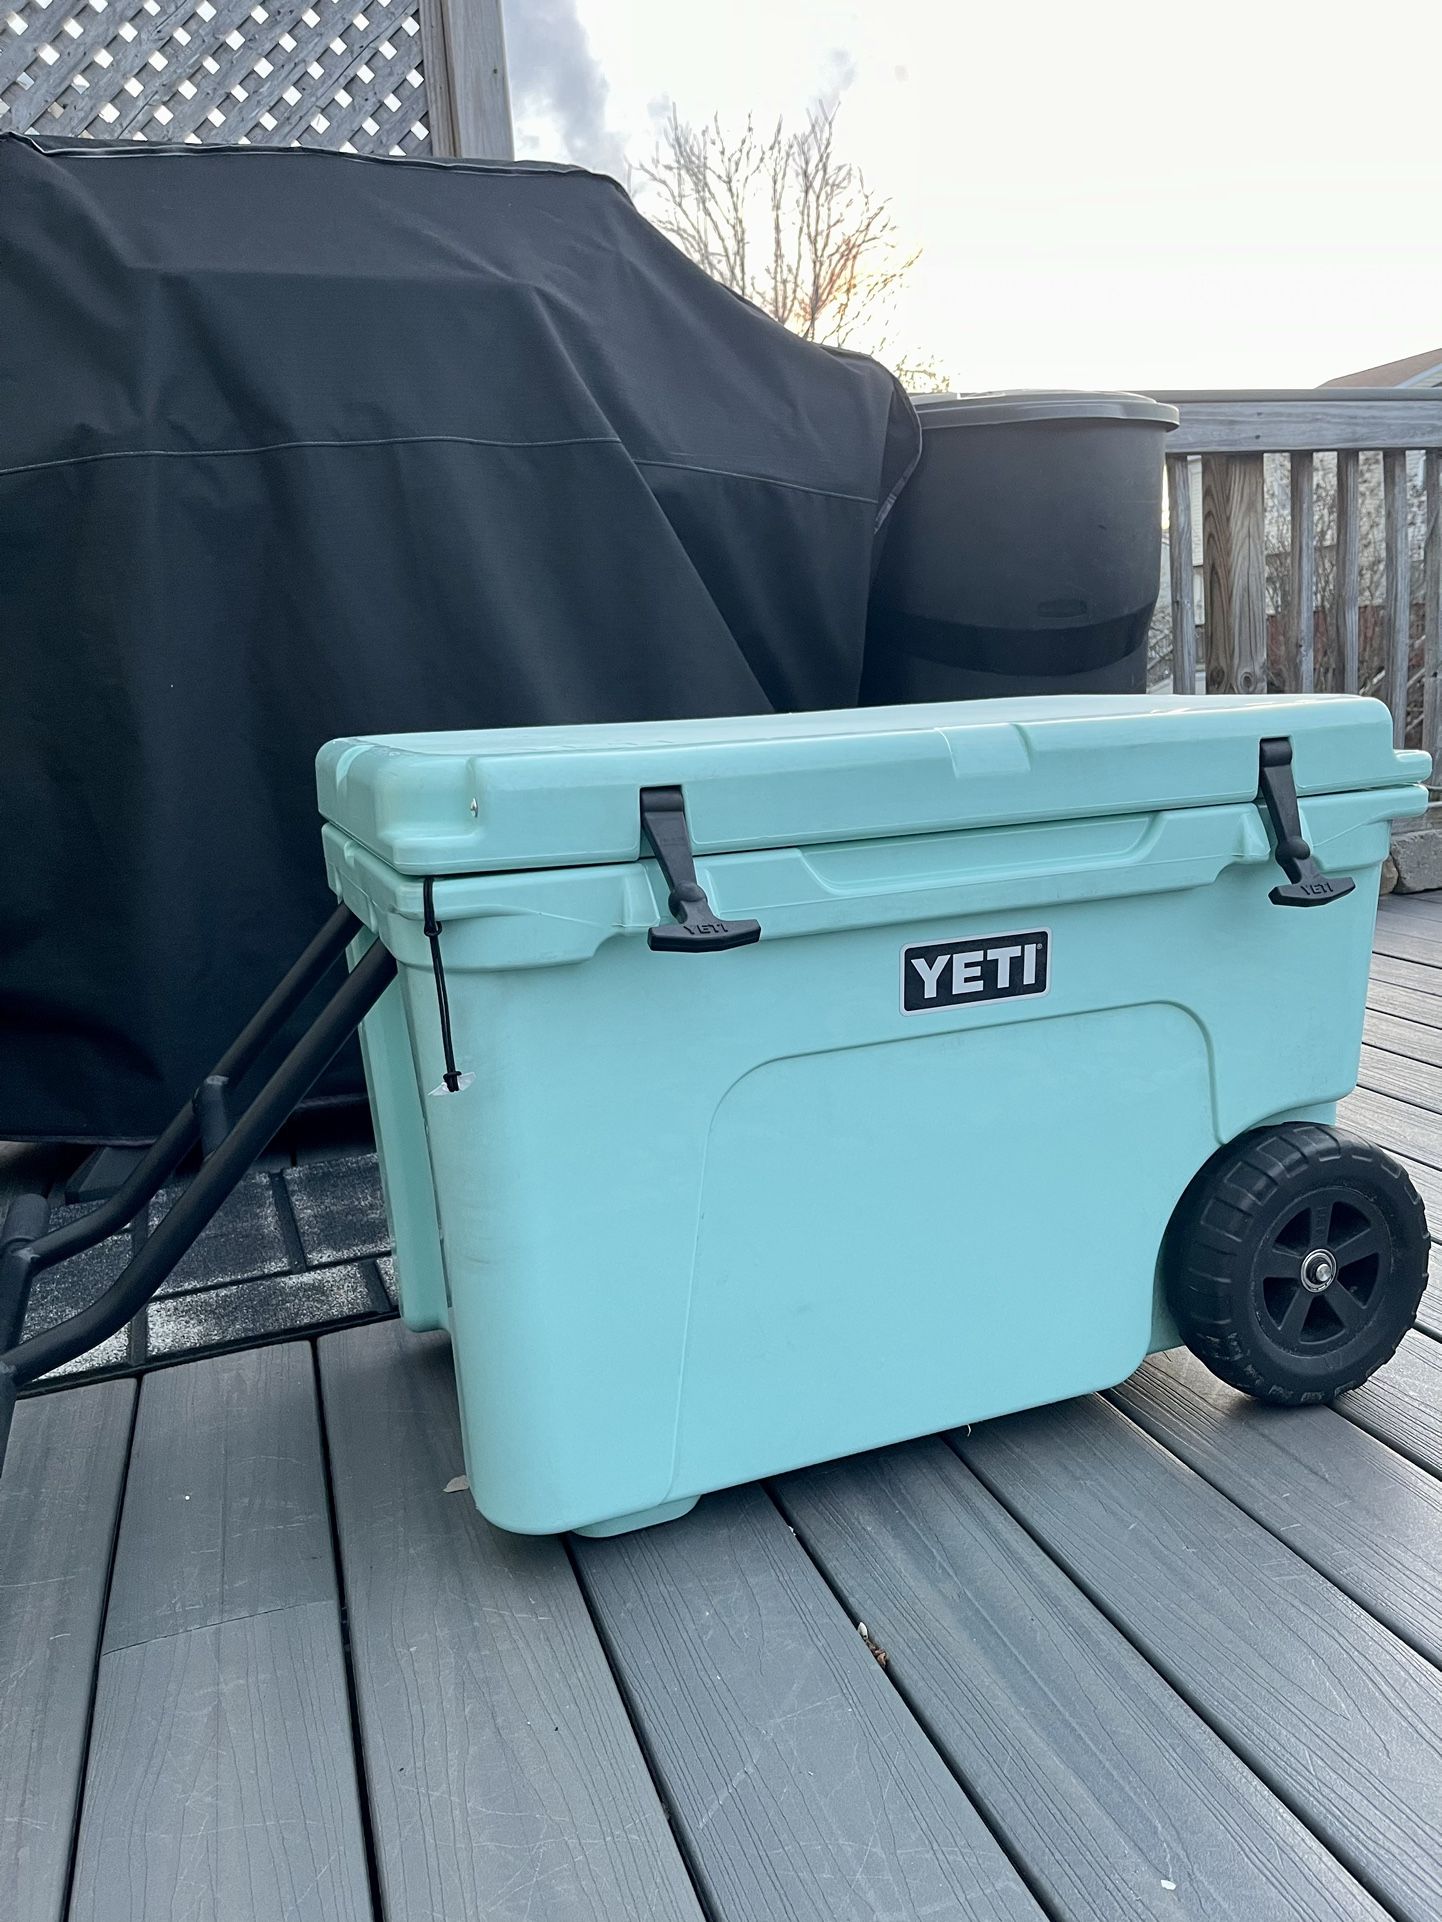 YETI Tundra Haul Wheeled Cooler for Sale in Montgomery Village, MD